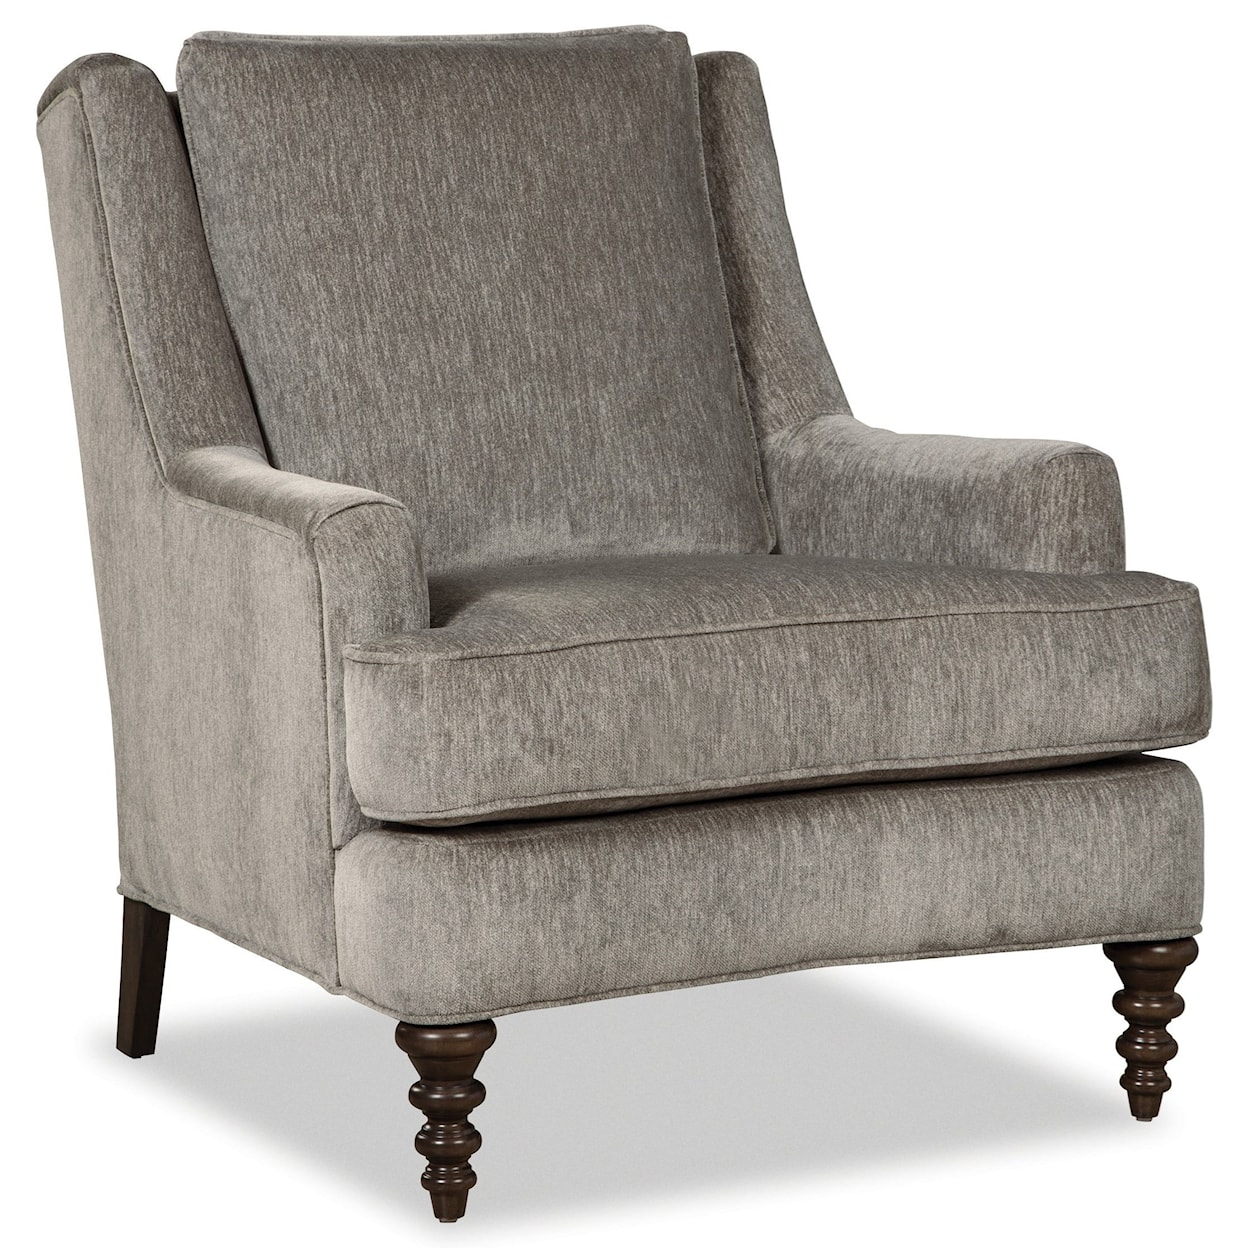 Craftmaster 090410 Accent Chair